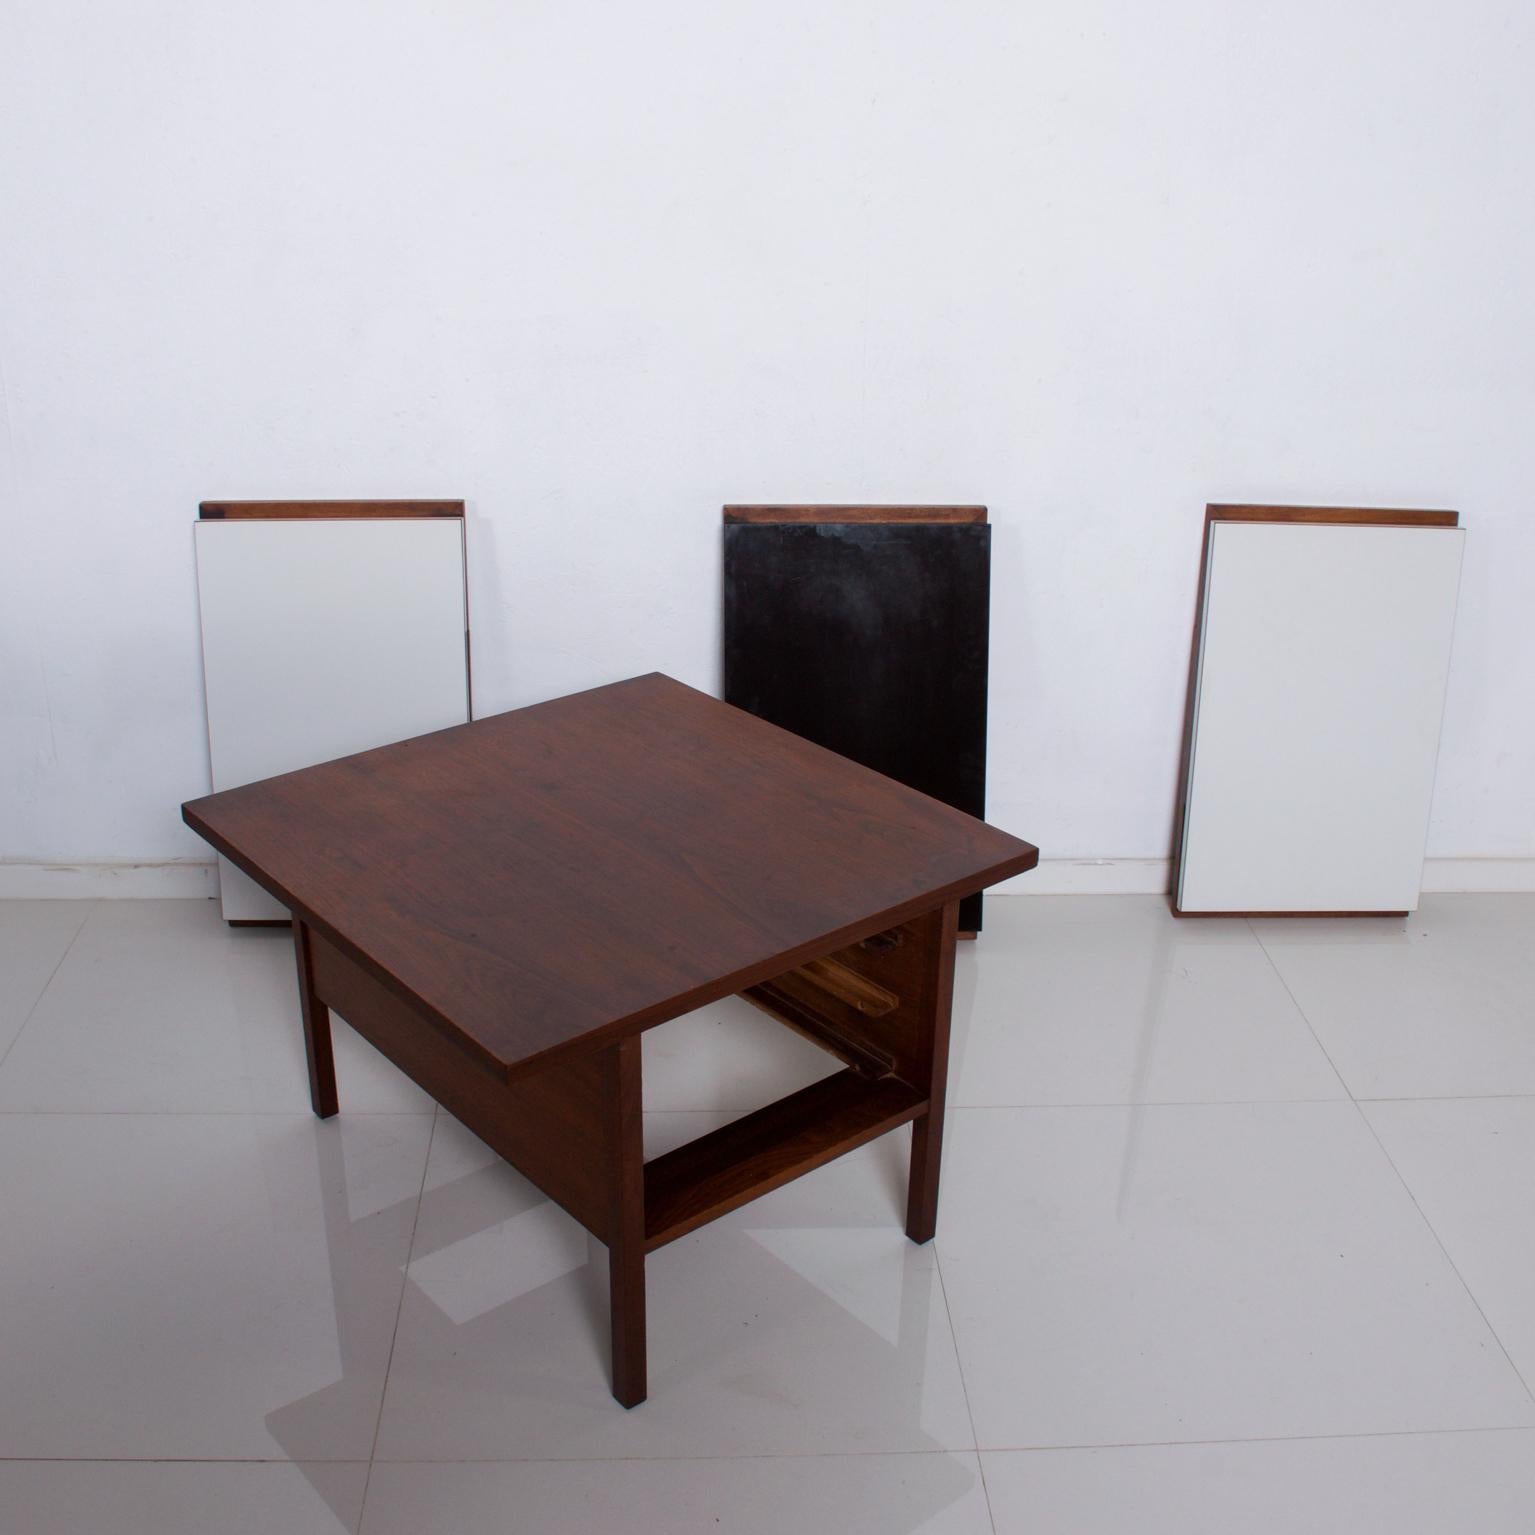 Mid-20th Century Walnut Coffee Table w/ Nesting Side Tables by John Keal for Brown Saltman 1960s